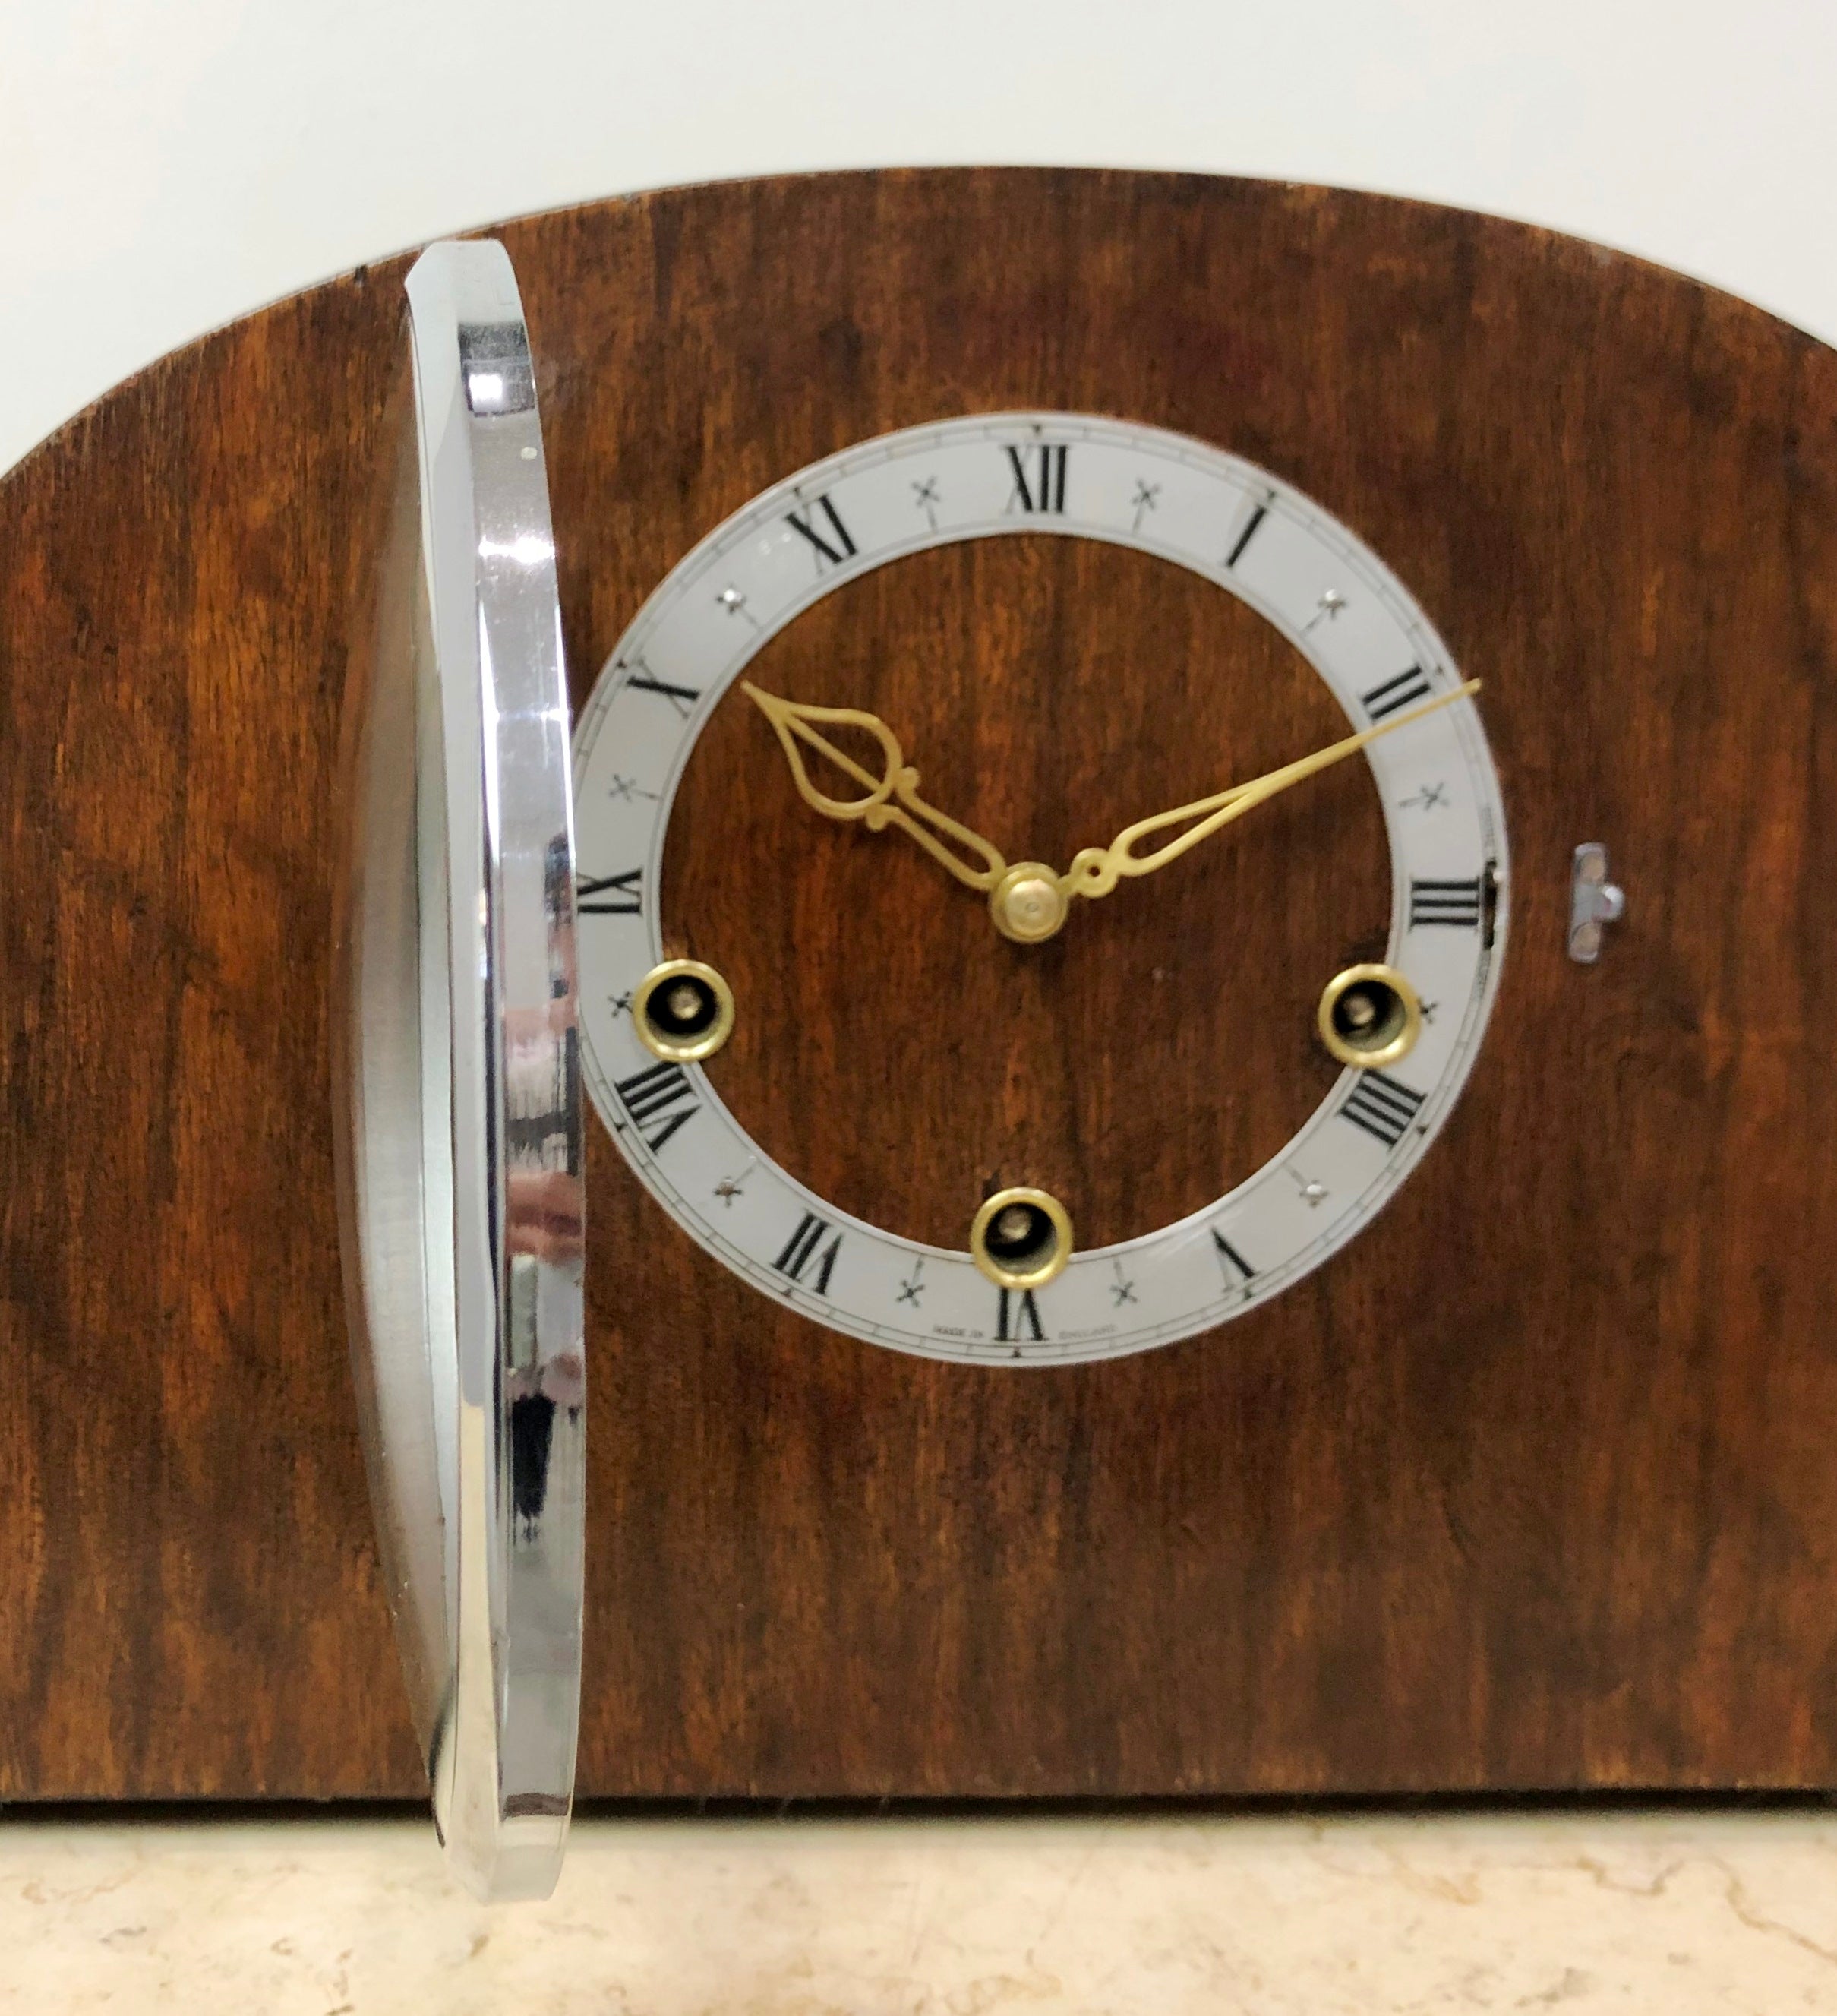 Vintage Westminster Chime Hammer on Rods England Mantel Clock - eXibit collection